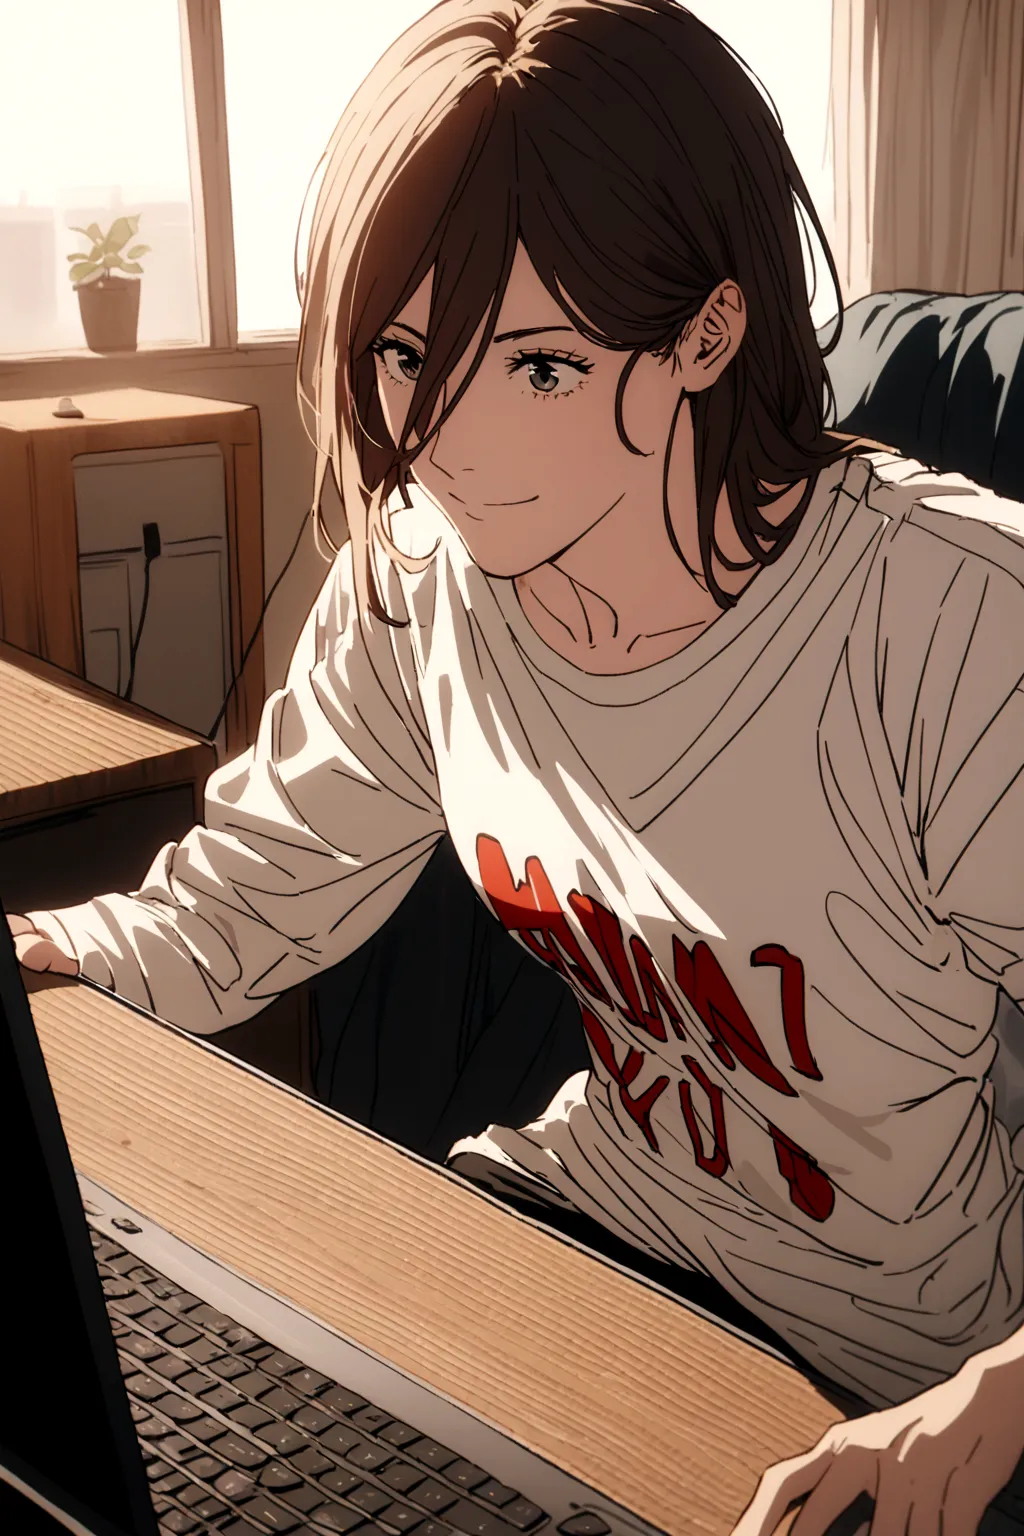 A Power,playing on a PC,all happy to win you ,wearing a shirt written, Harl.